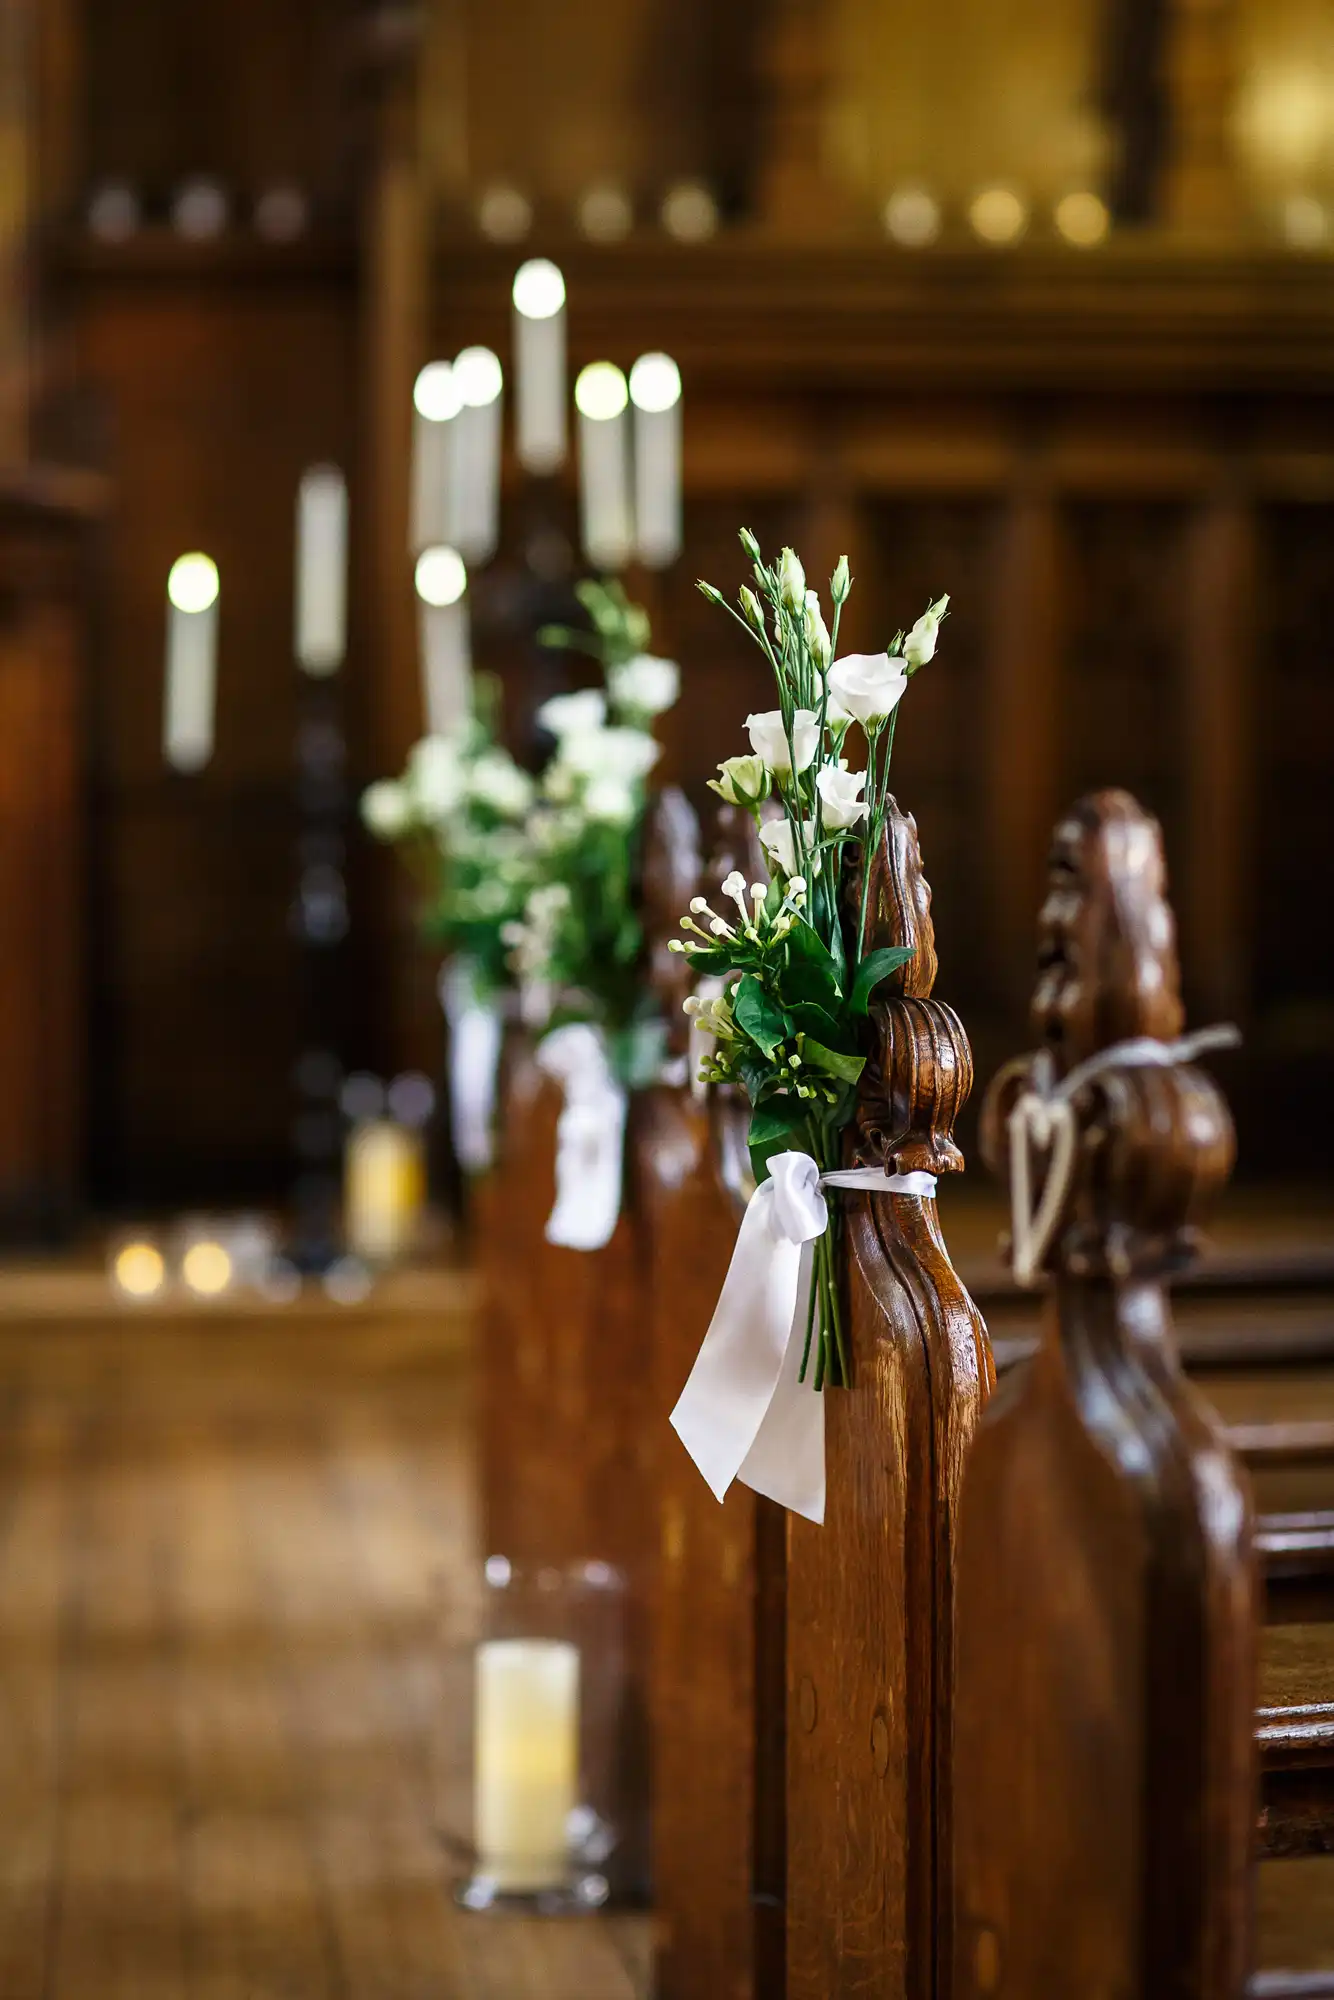 Wooden church pews decorated with white flowers and ribbons, candles in the background, in a dimly lit church setting.